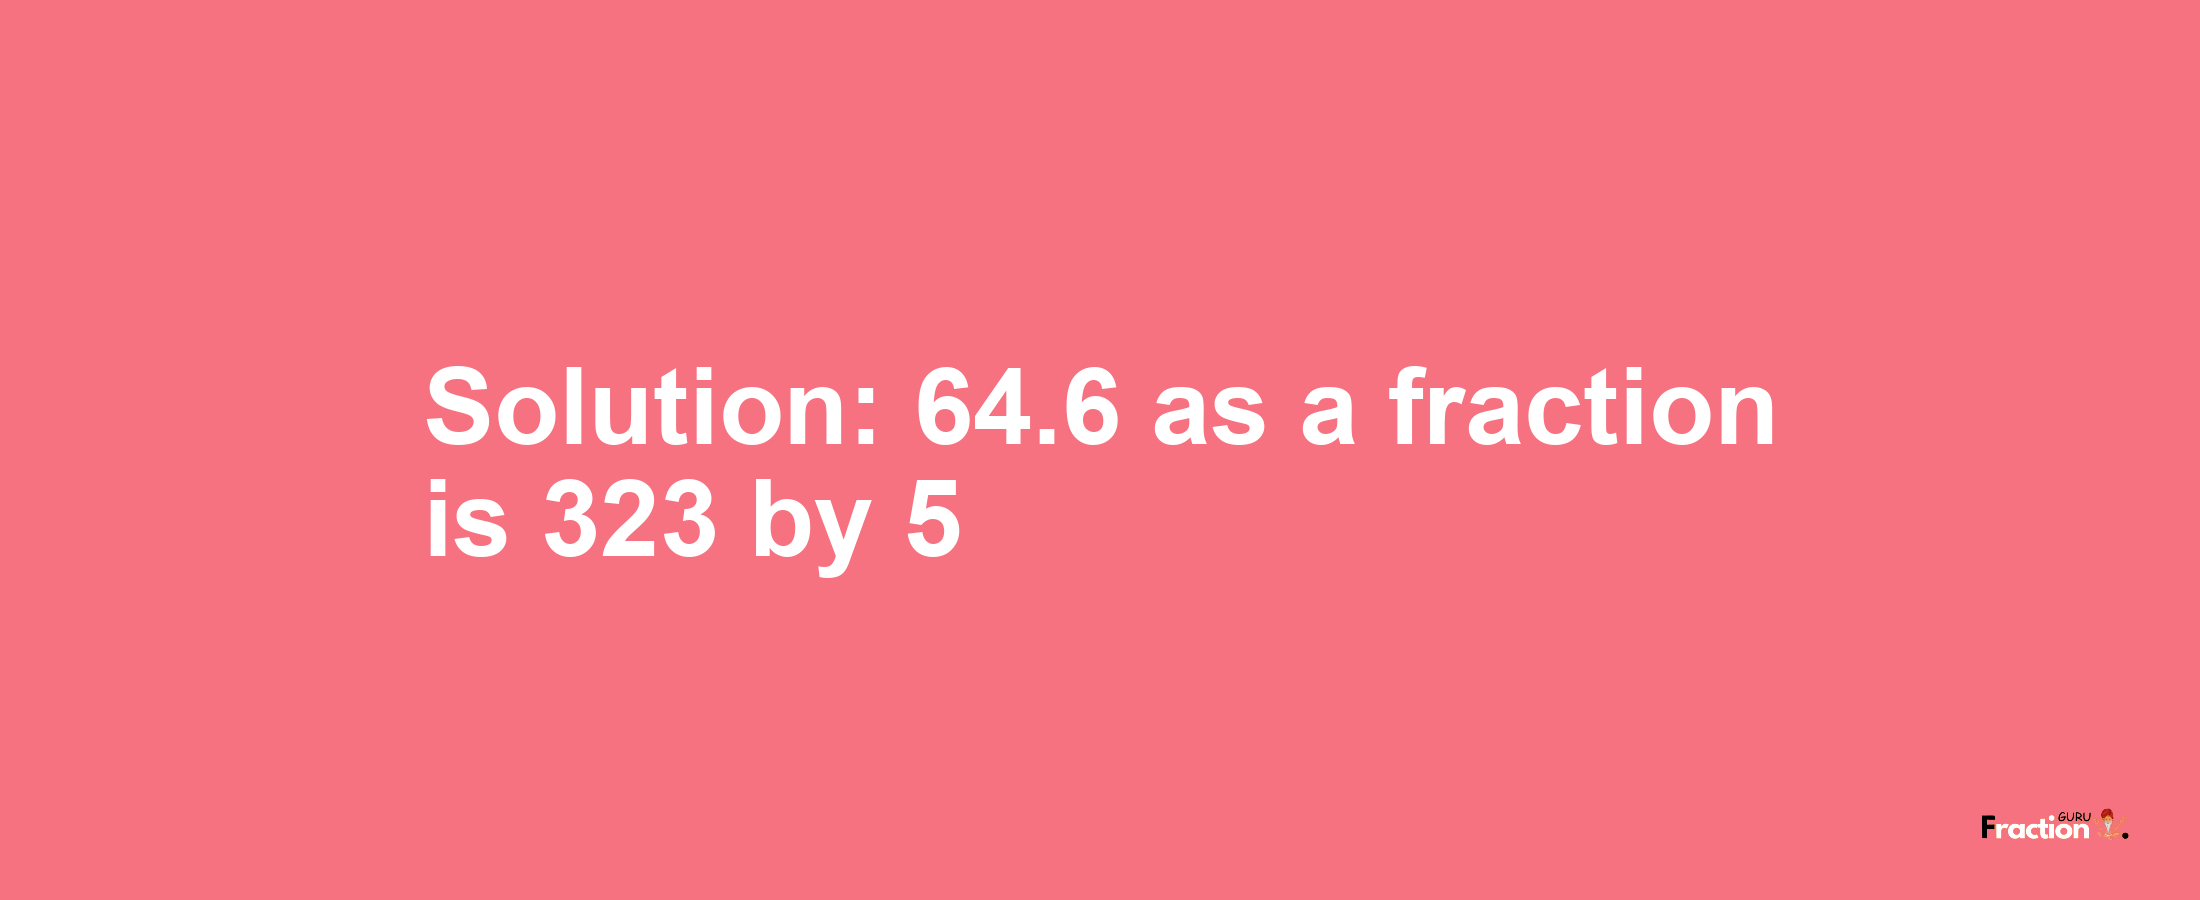 Solution:64.6 as a fraction is 323/5